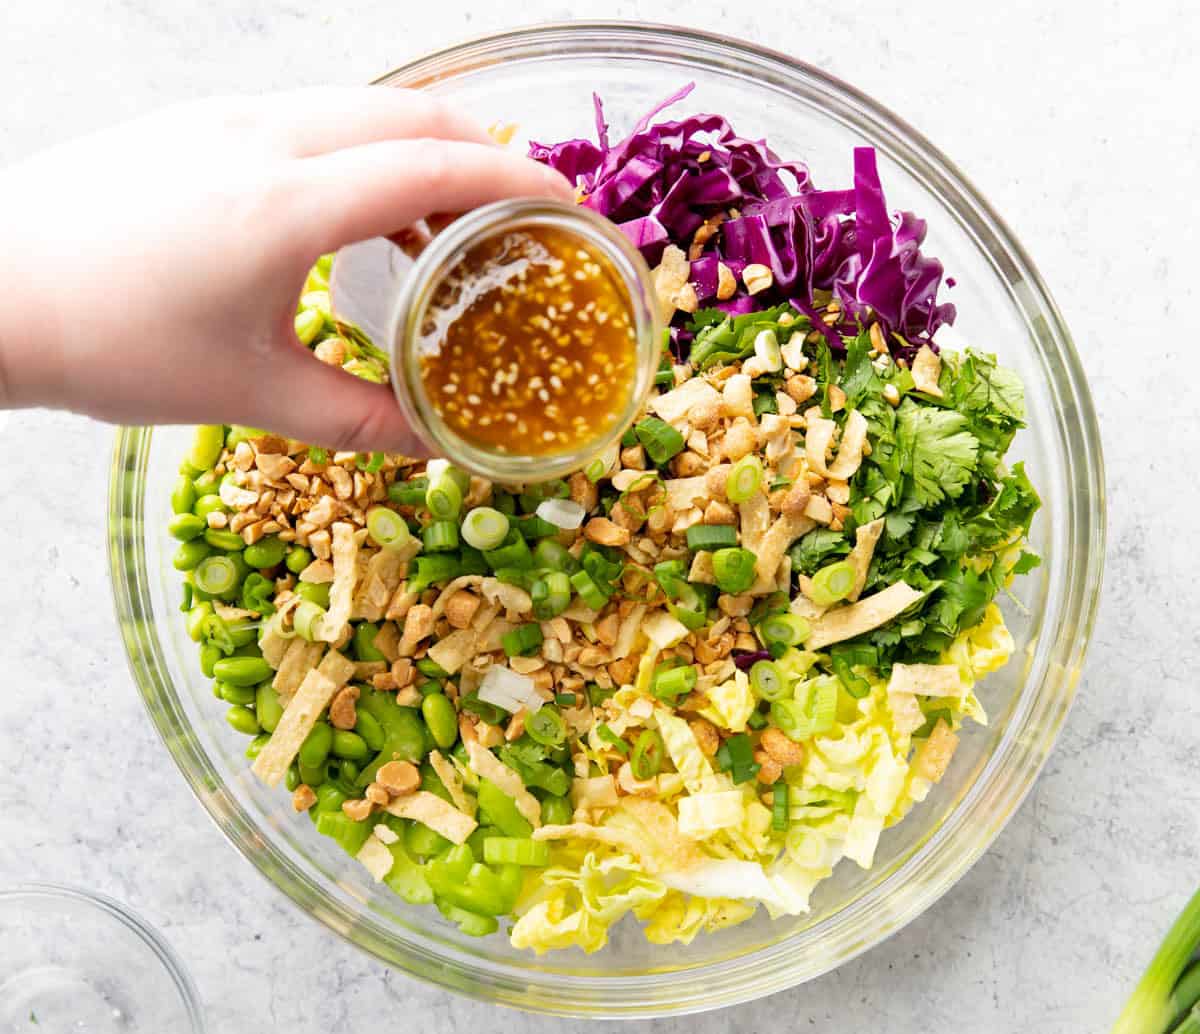 Asian sesame ginger dressing poured over chopped cabbage, green onions, edamame